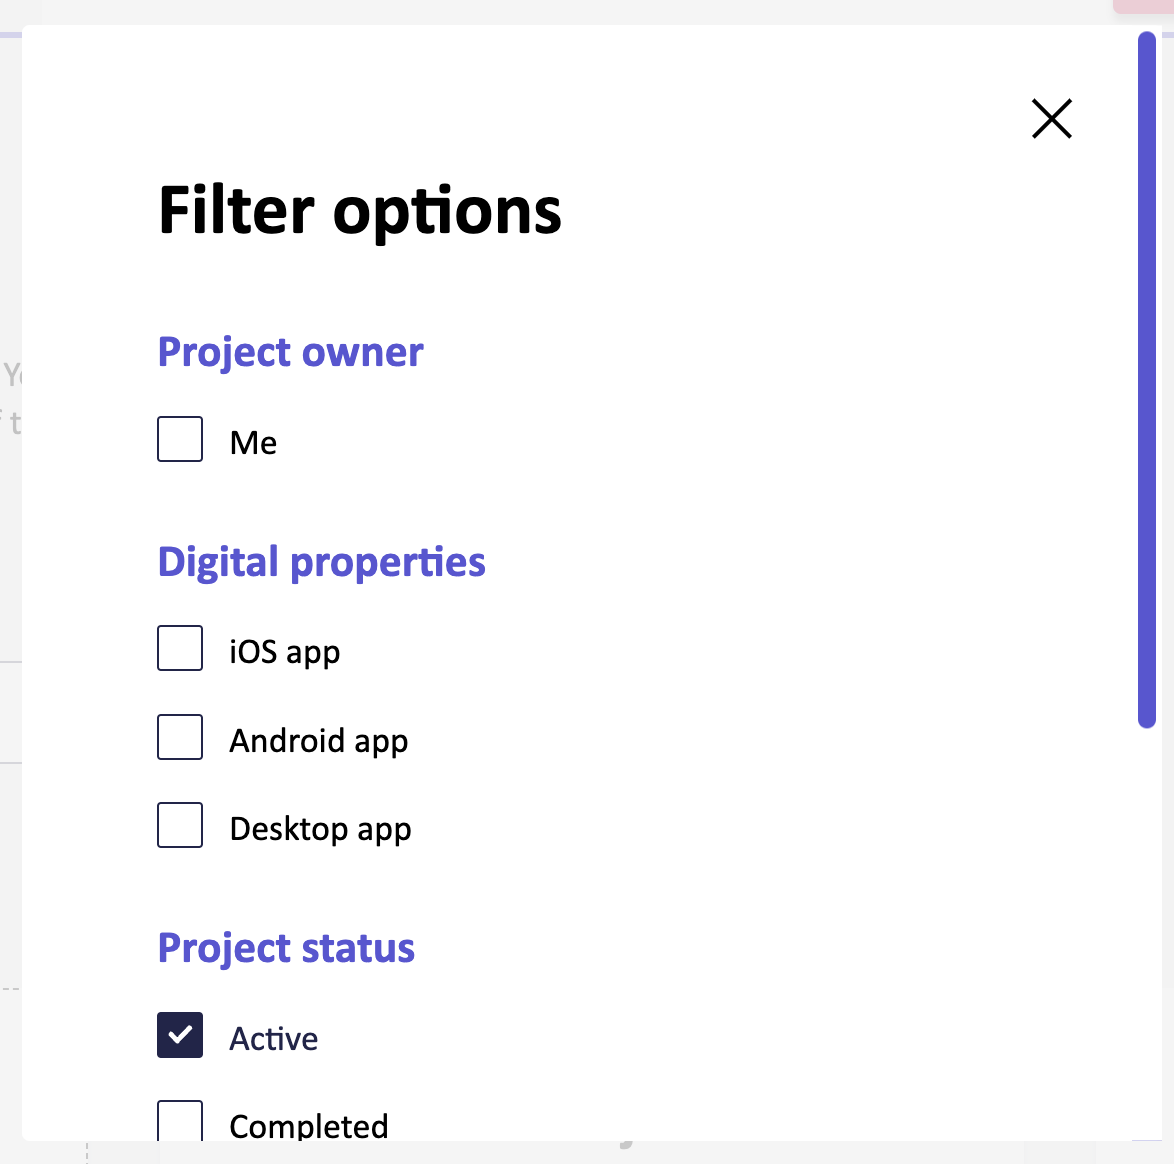 Screenshot of project dashboard filter modal, including filter options by project owner, digital property, and project status.